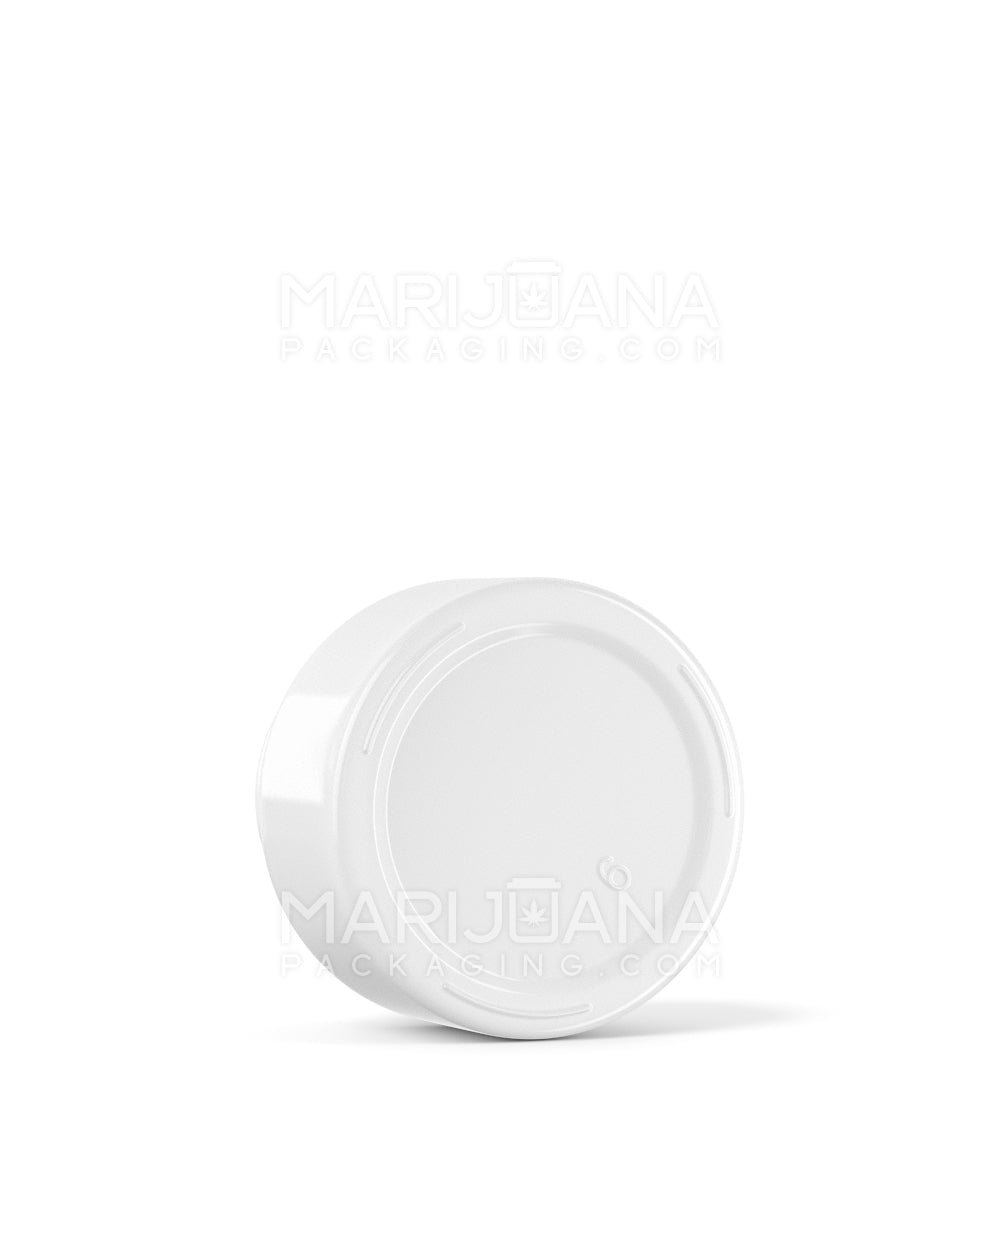 Glossy White Glass Concentrate Containers | 29mm - 5mL - 504 Count - 4